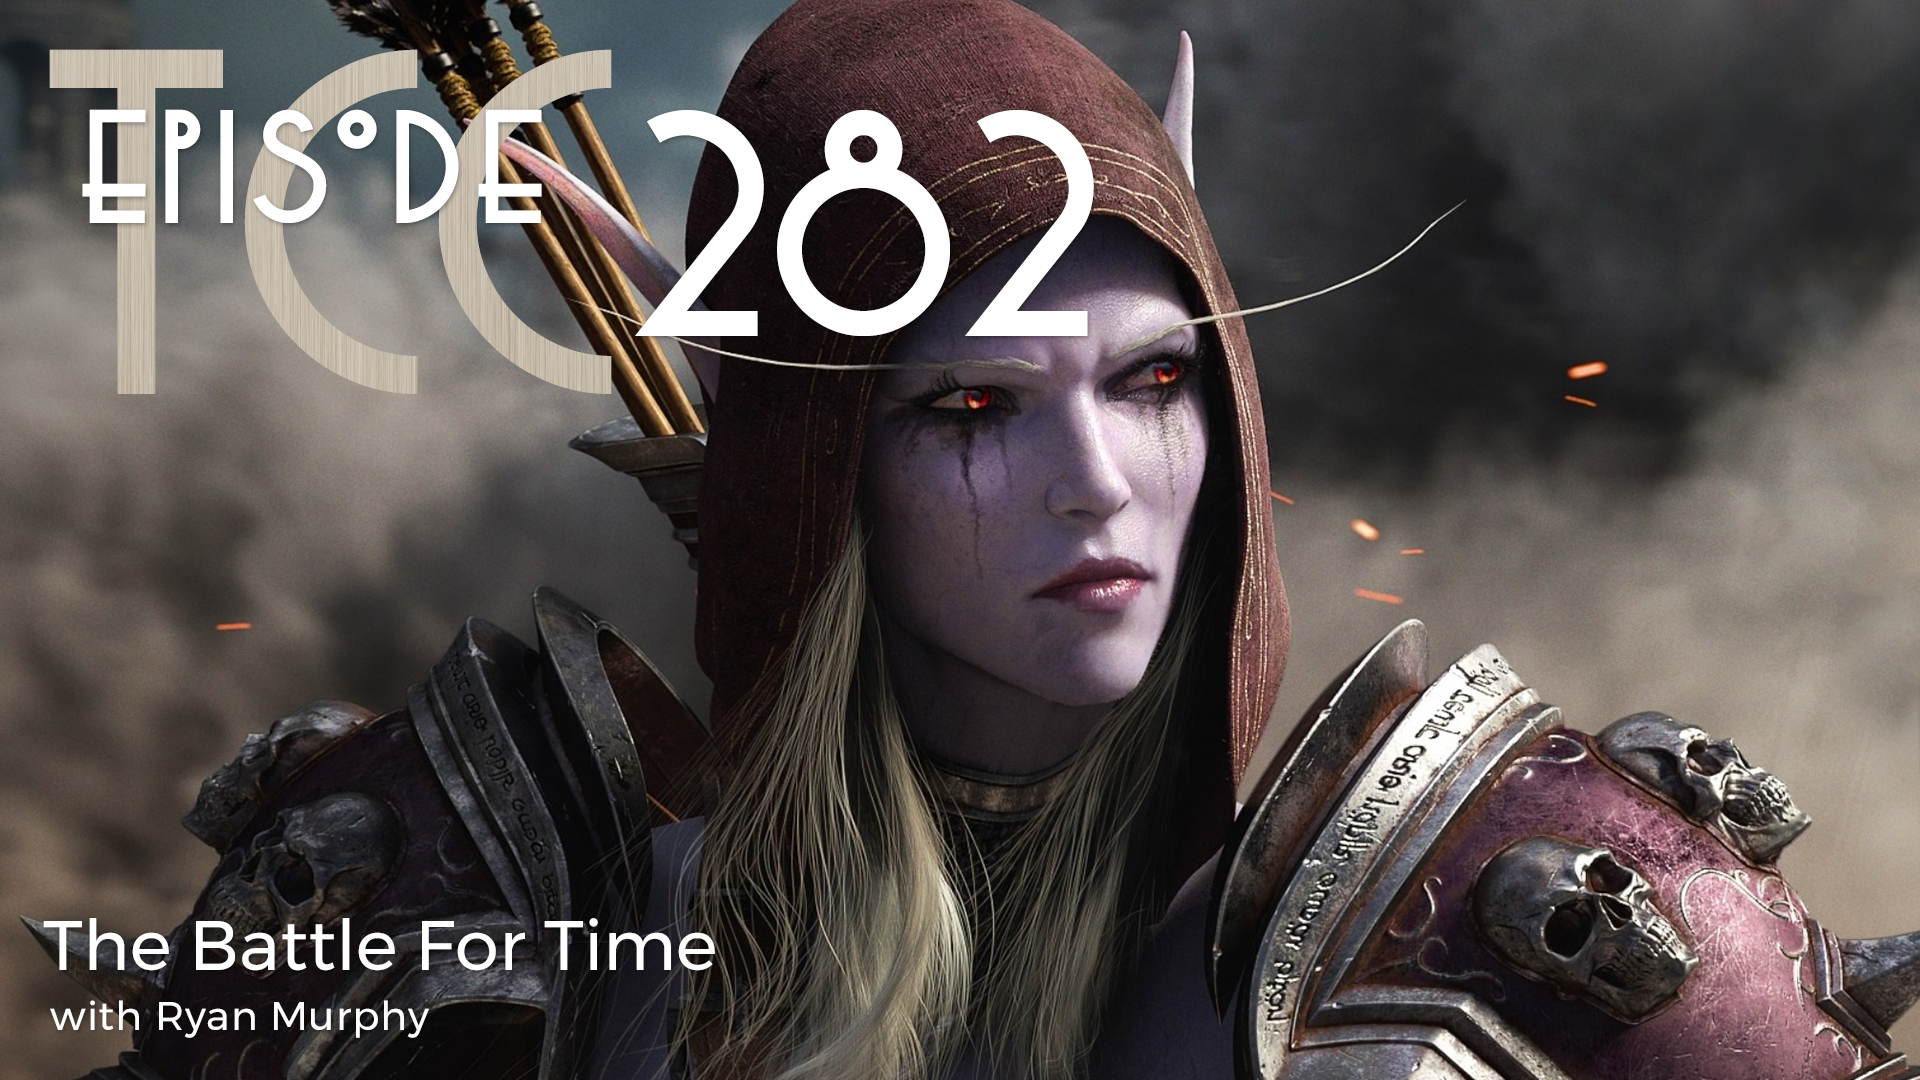 The Citadel Cafe 282: The Battle For Time